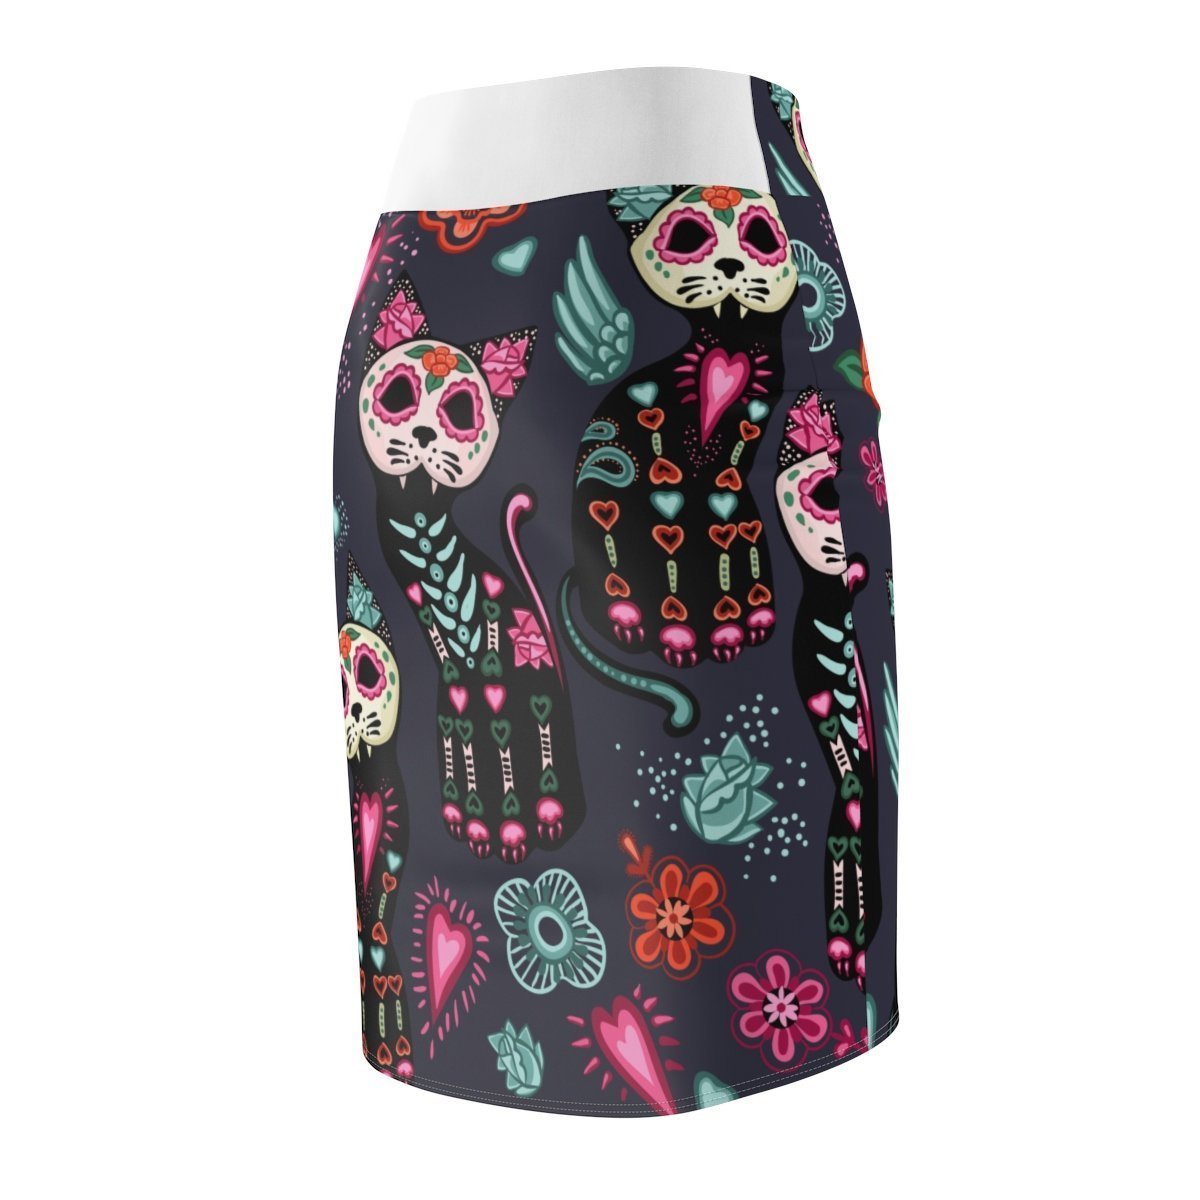 Cat Clothes for Women, Knee High Cat Skirt Featuring Colorful Skeleton Cat Print